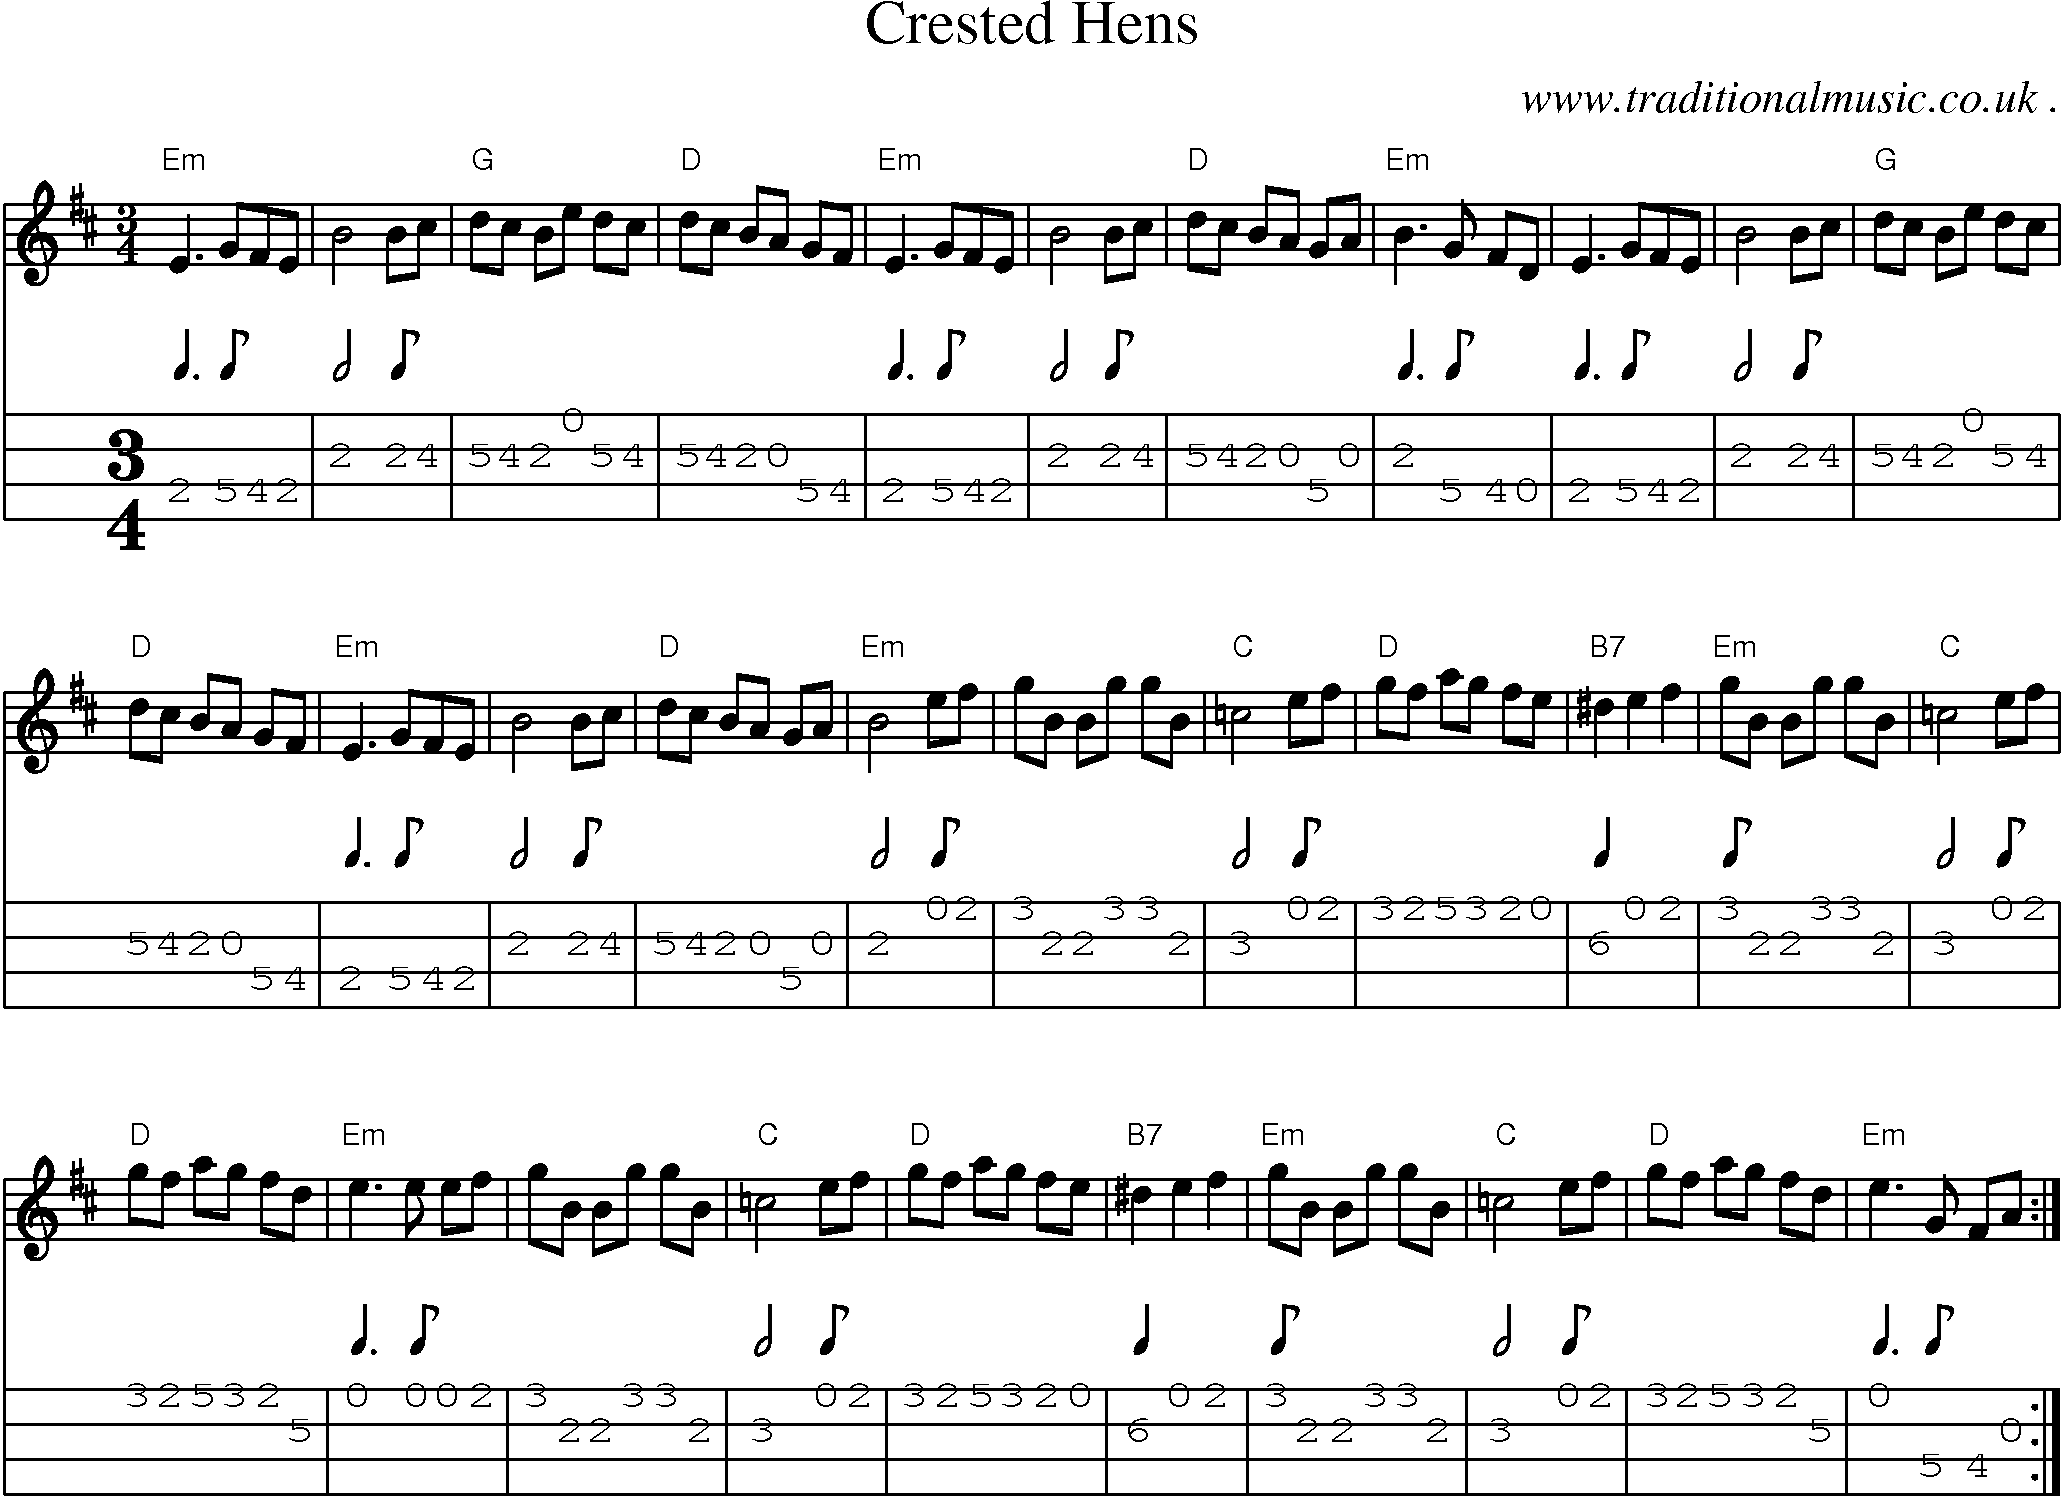 Music Score and Guitar Tabs for Crested Hens